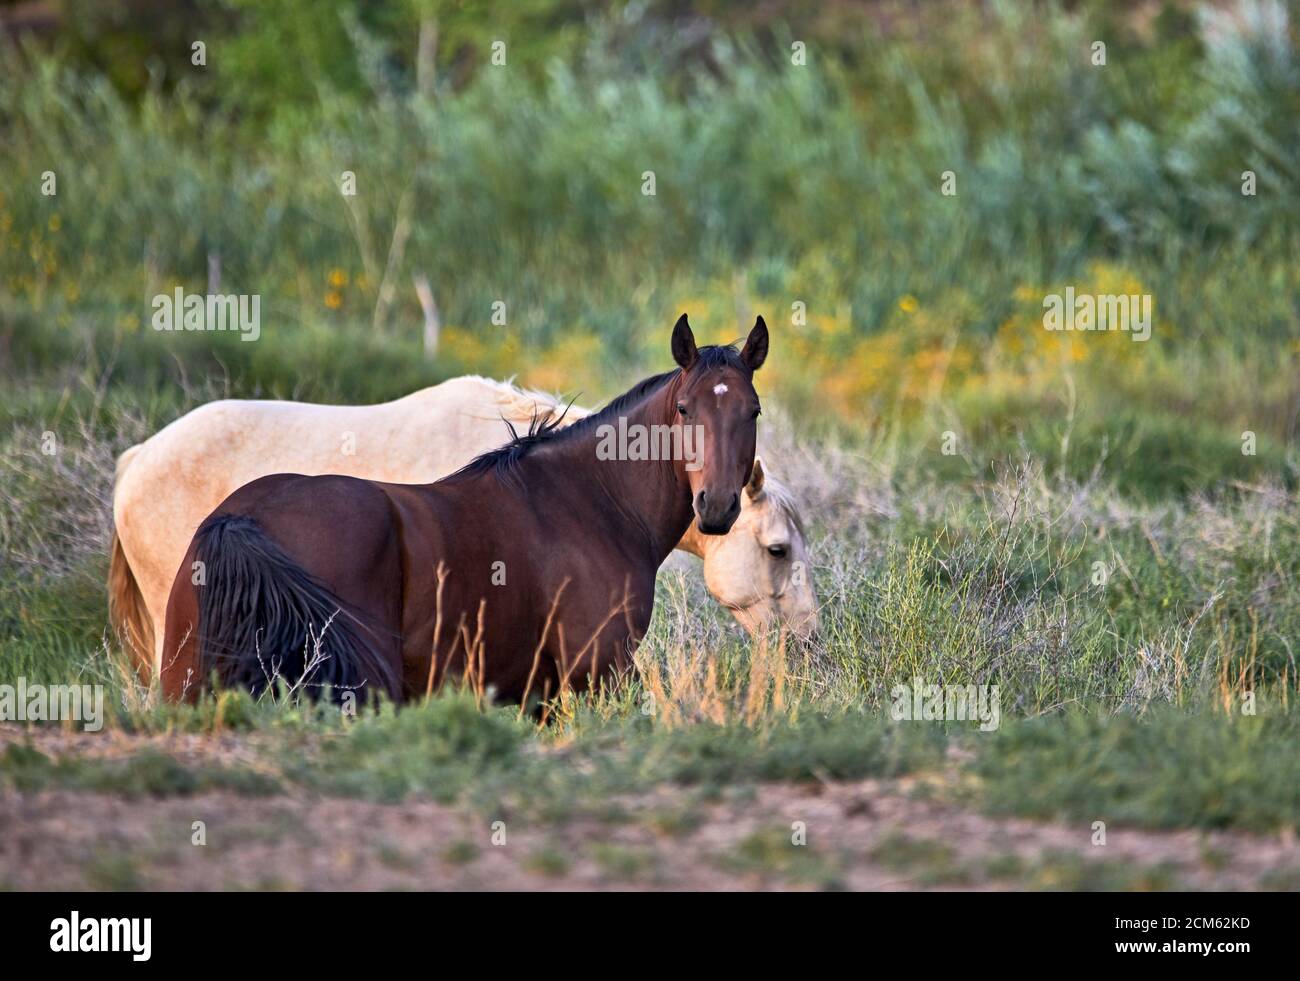 Domesticated young horses in a field standing together with shallow depth of field Stock Photo